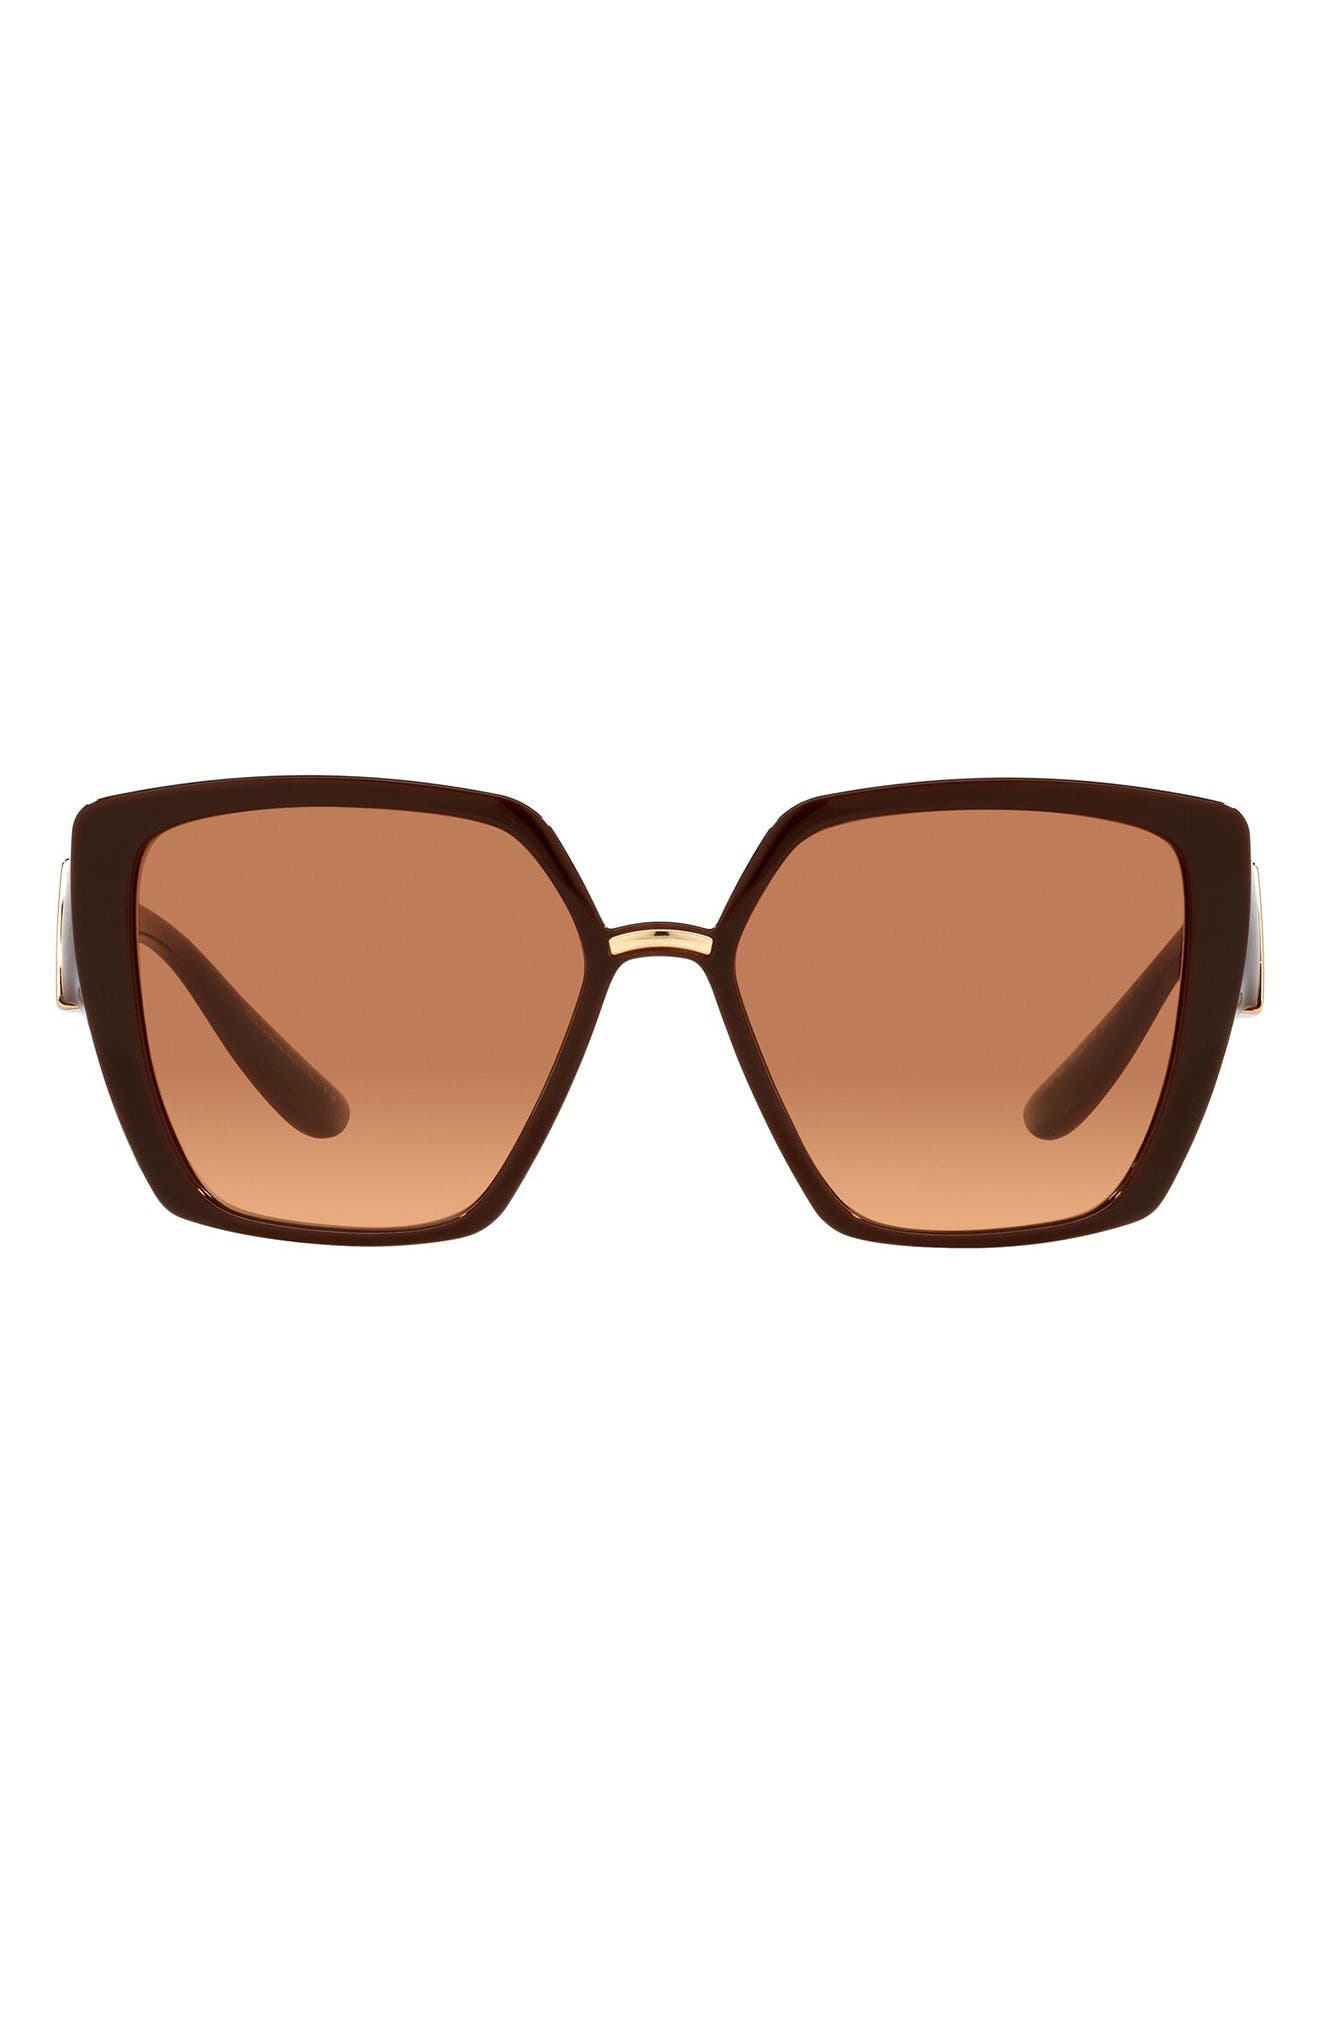 Dolce & Gabbana 53mm Butterfly Gradient Sunglasses in Trans Amber/Orange Brown